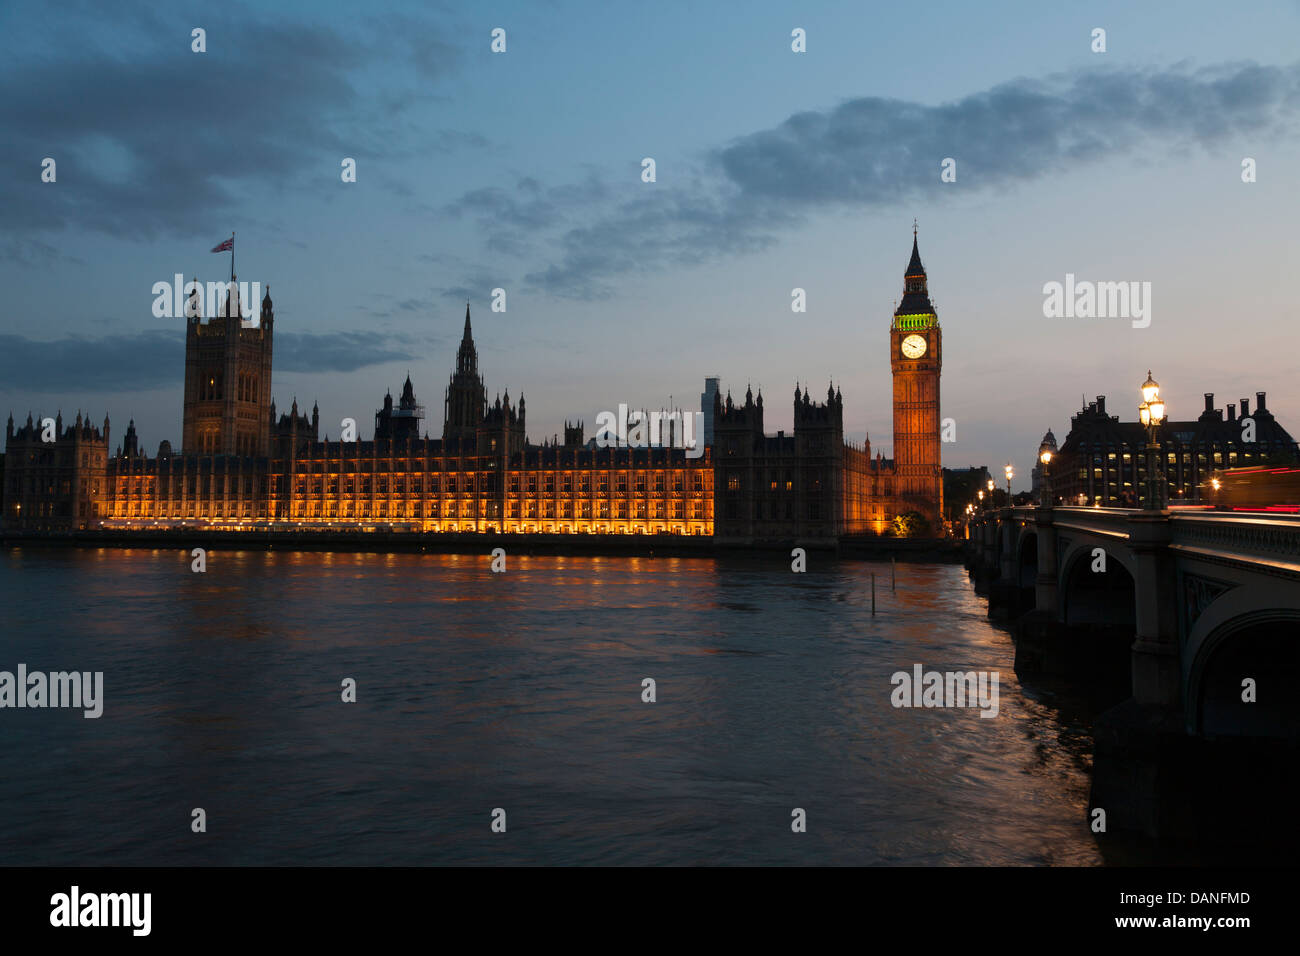 Palace Of Westminster, Houses Of Parliament, Elisabeth Tower, Big Ben, London, UK Stock Photo